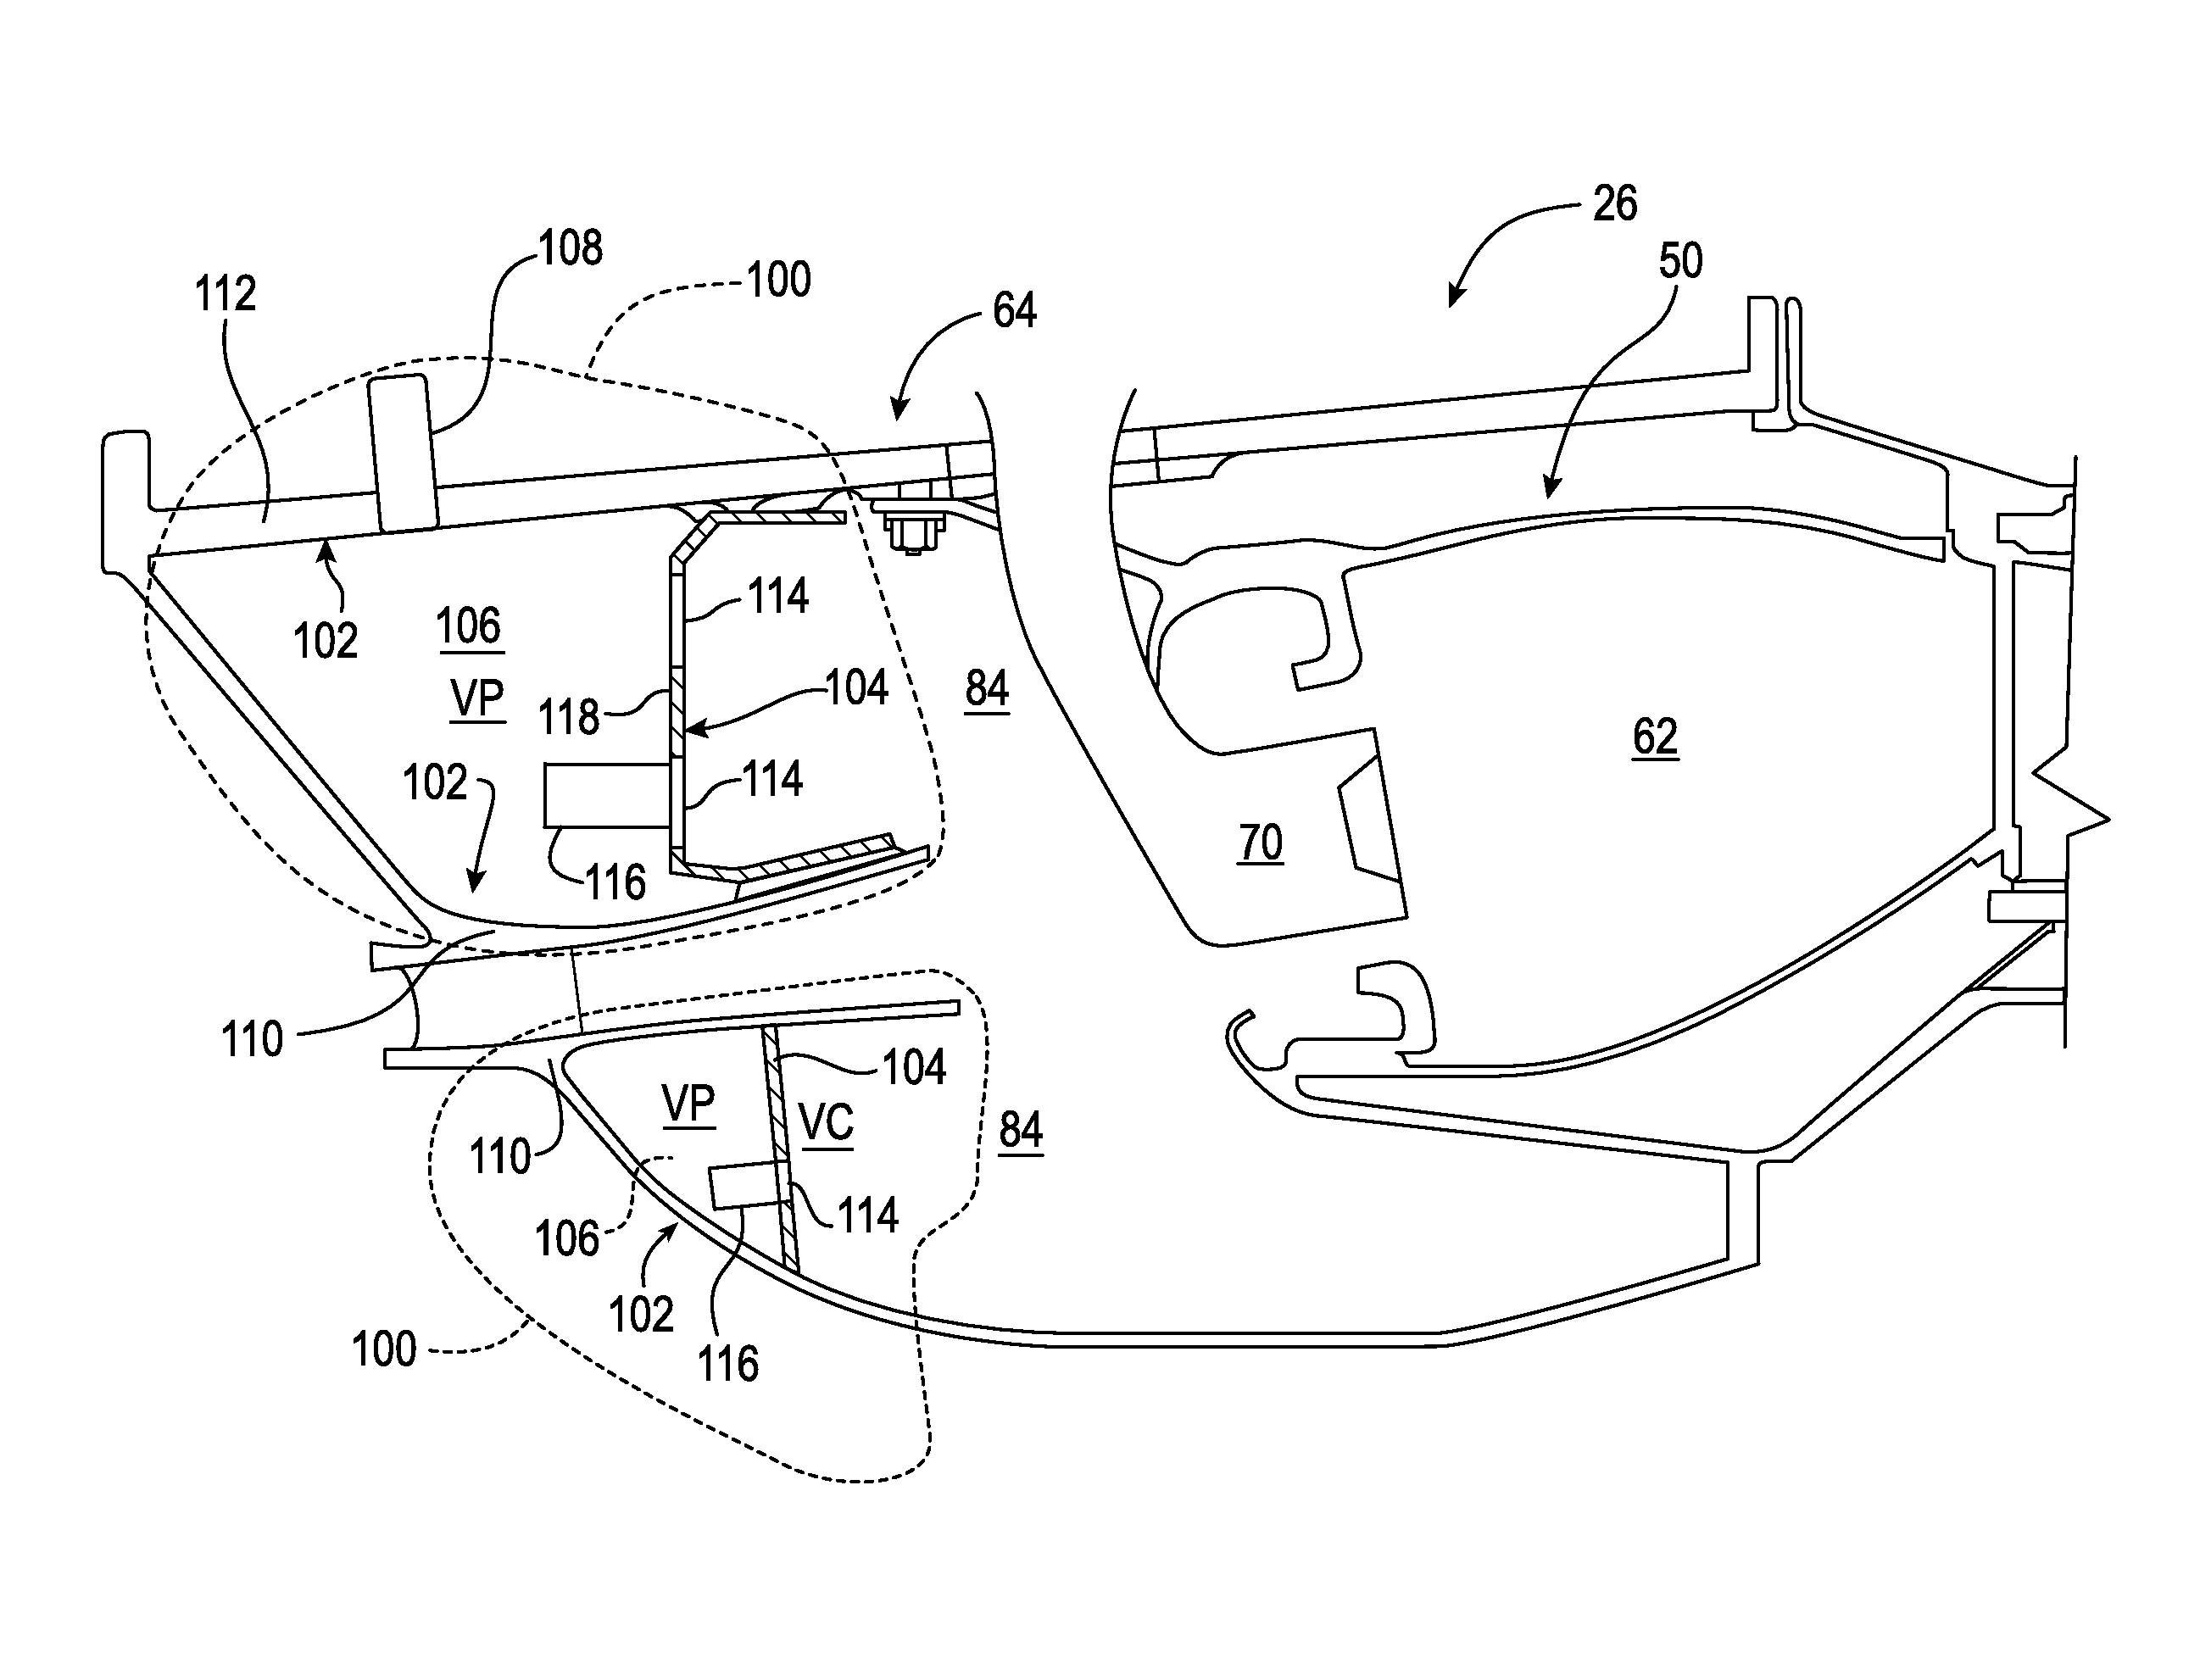 System for suppressing acoustic noise within a gas turbine combustor